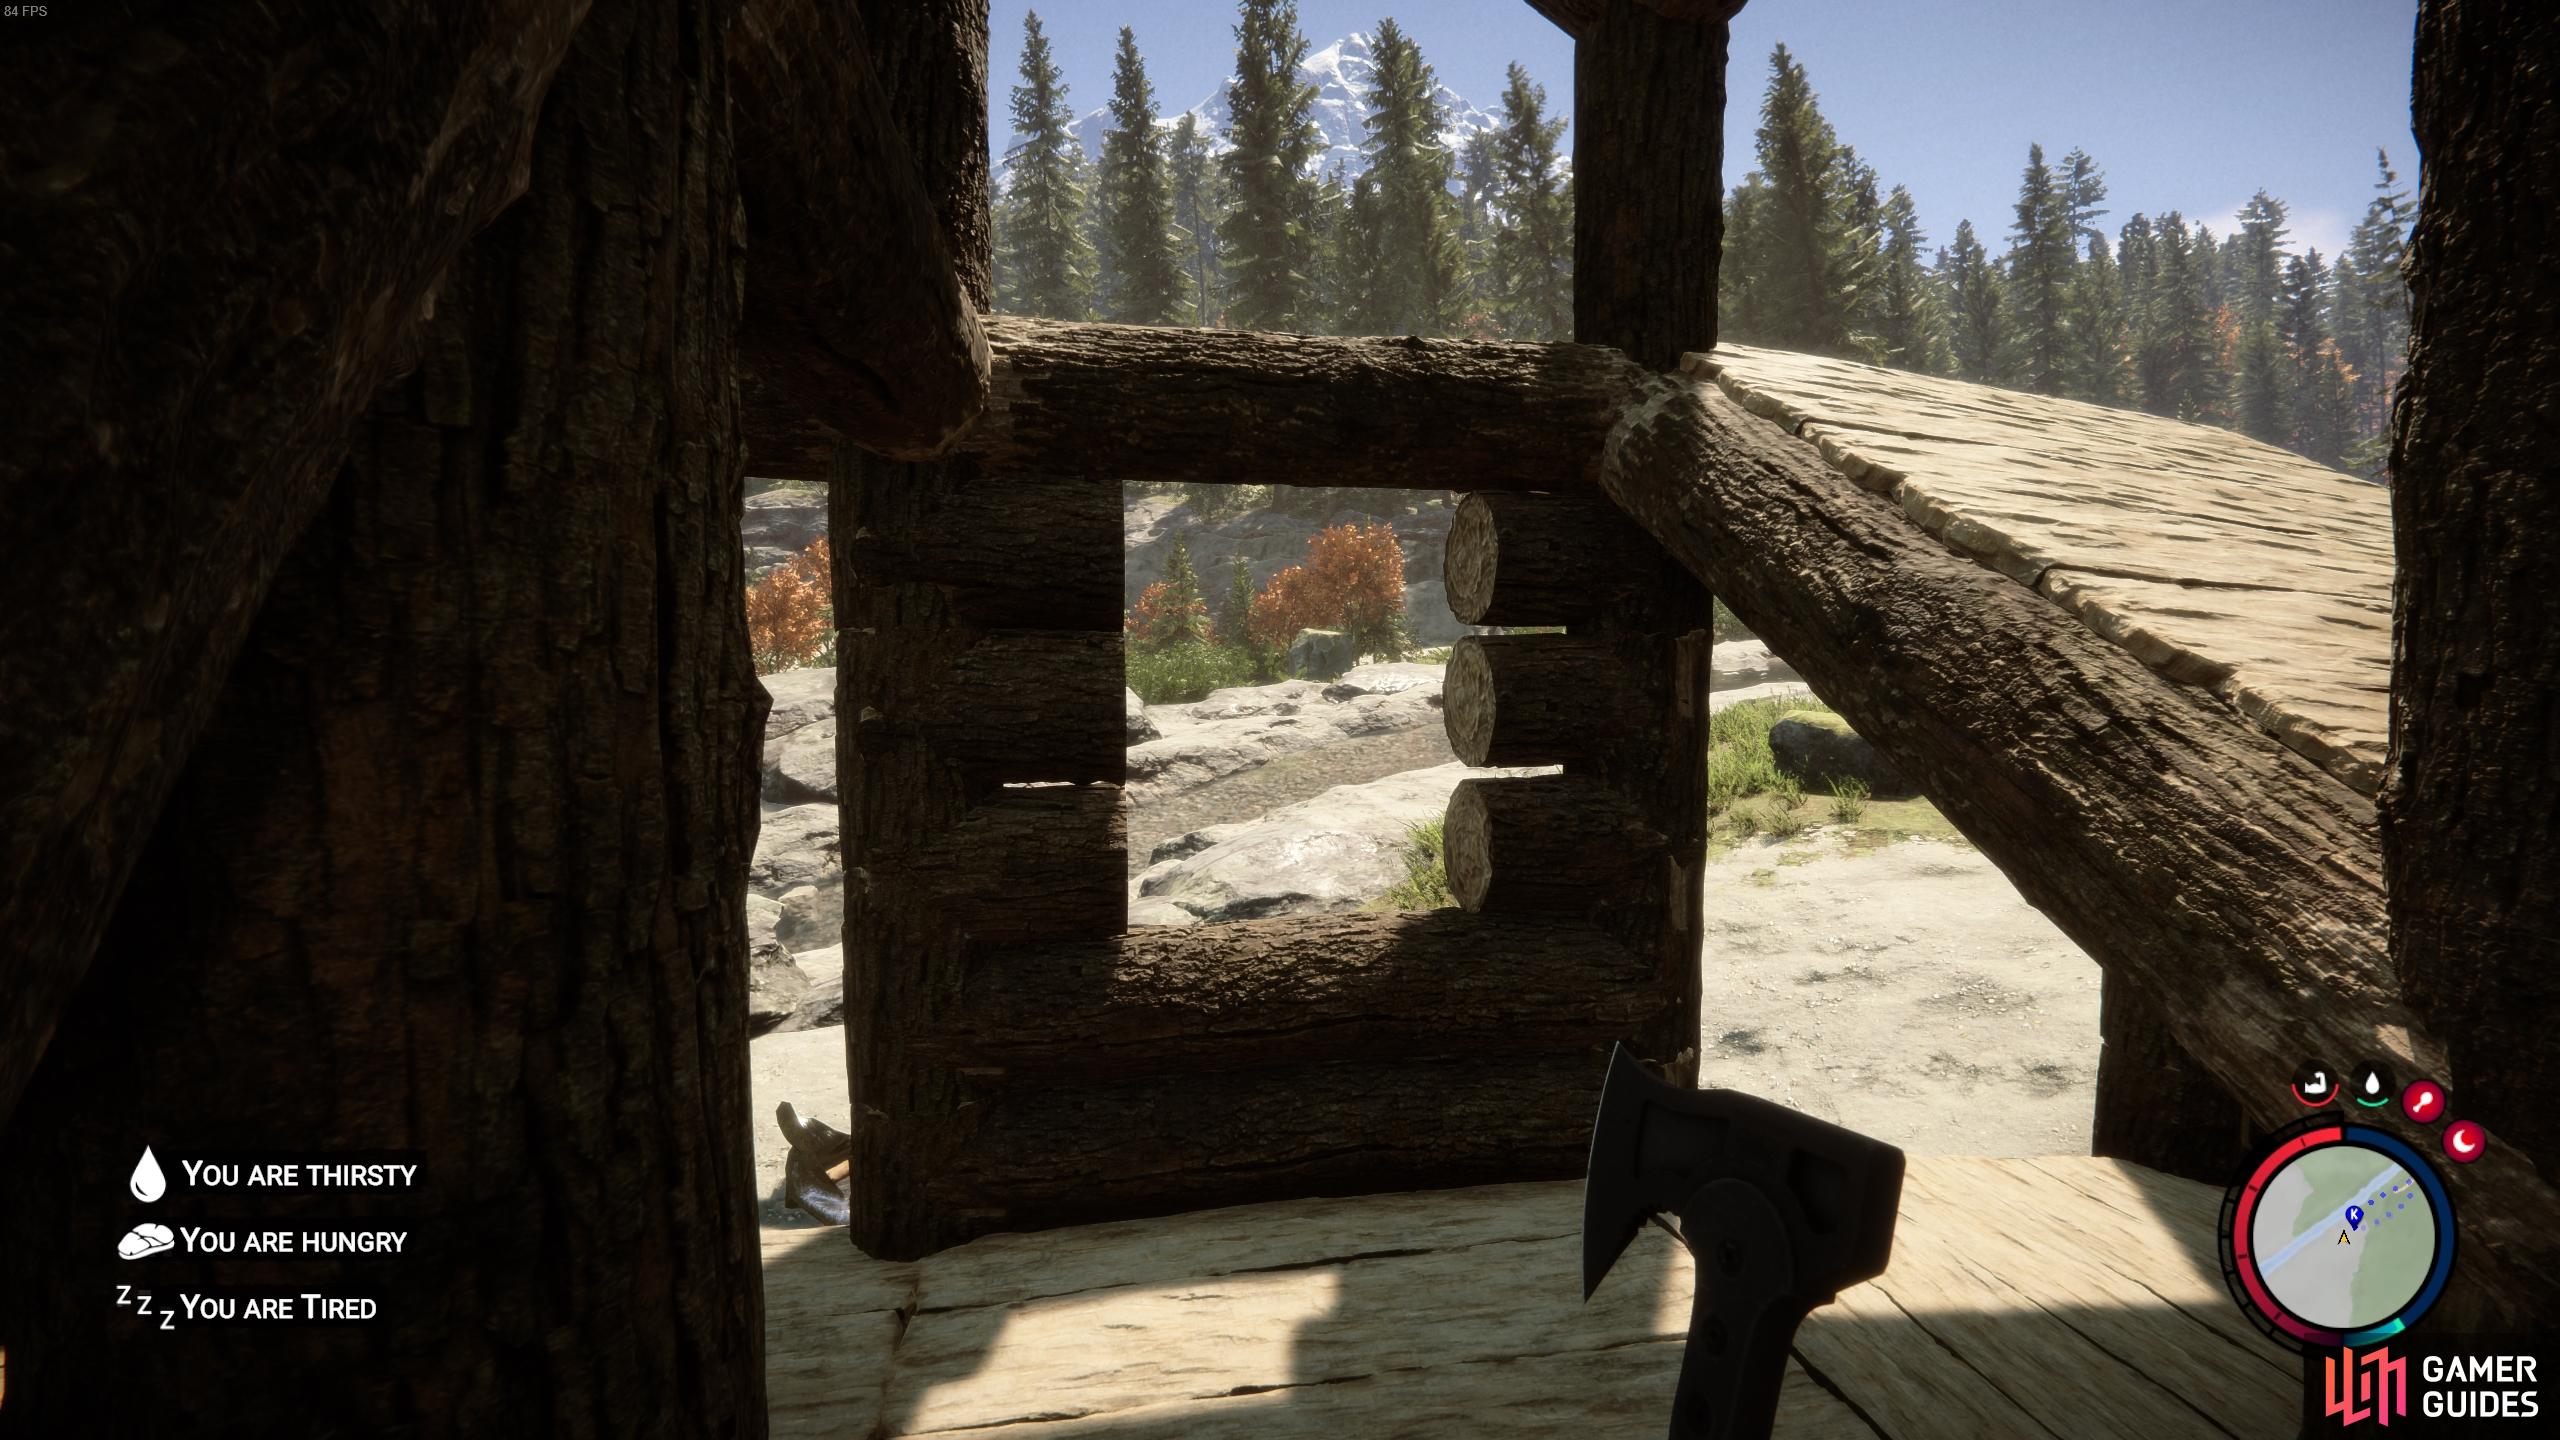 You can create a window by chopping enough chunks of wood out of the wall.